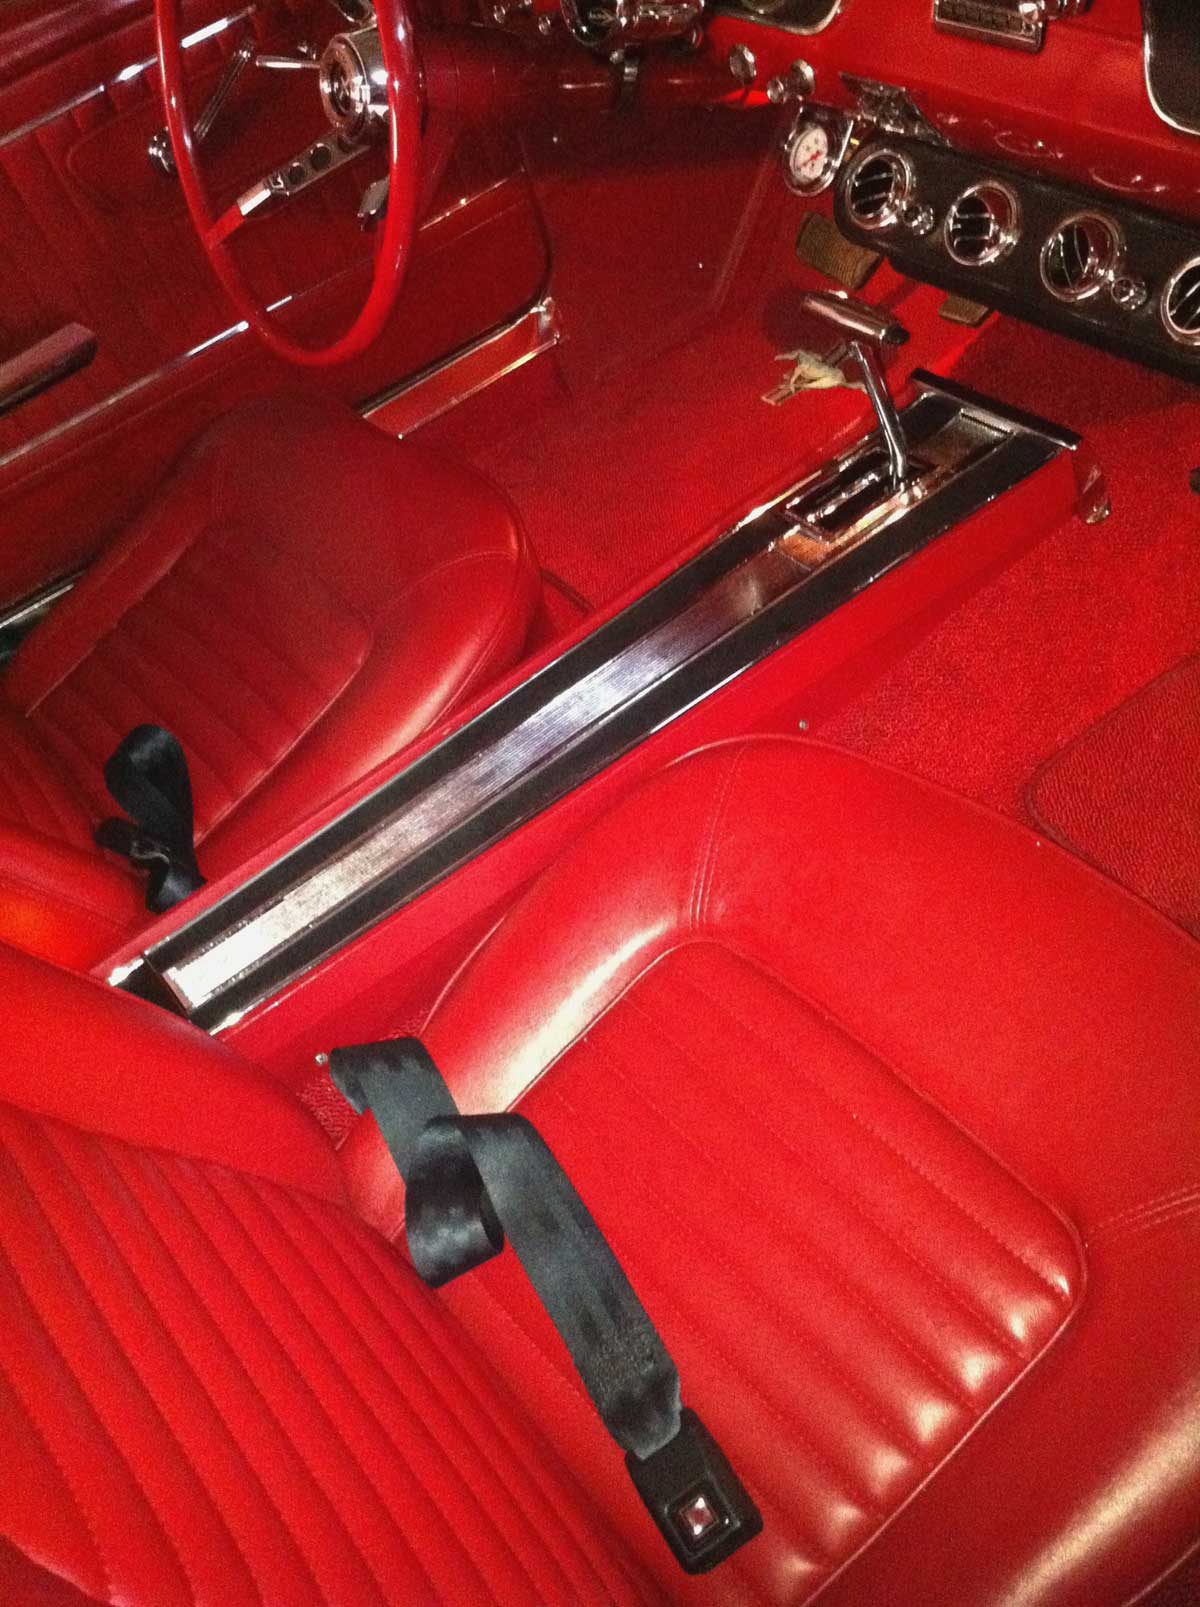 Center Console For My 65 Mustang The Mustang Source Ford